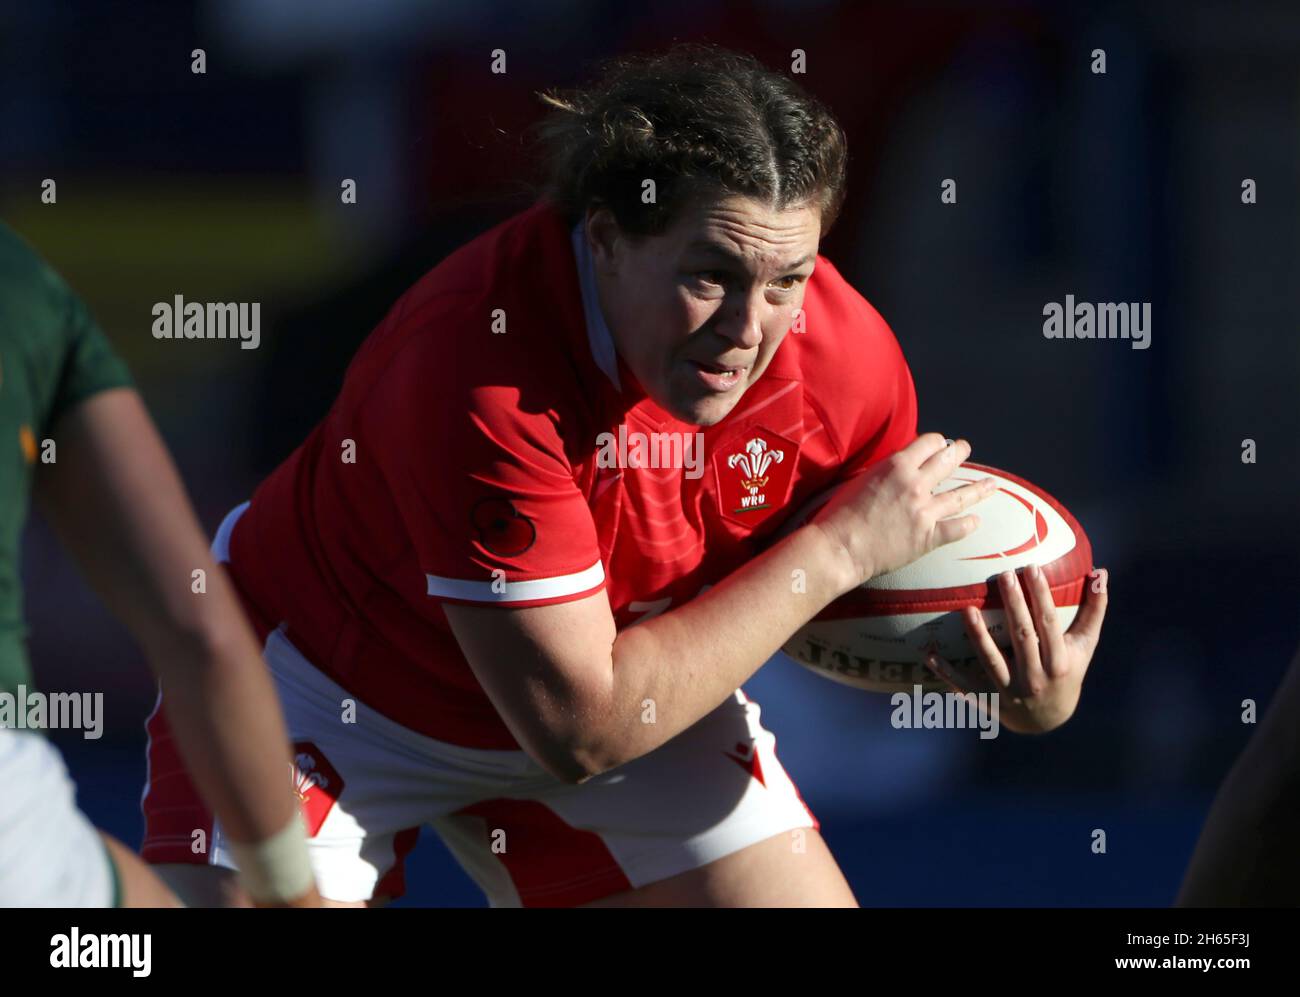 Wales' Cerys Hale during the Autumn International match at Cardiff Arms park, Cardiff. Picture date: Saturday November 13, 2021. See PA story RUGBYU Wales Women. Photo credit should read: Bradley Collyer/PA Wire. RESTRICTIONS: Use subject to restrictions. Editorial use only, no commercial use without prior consent from rights holder. Stock Photo